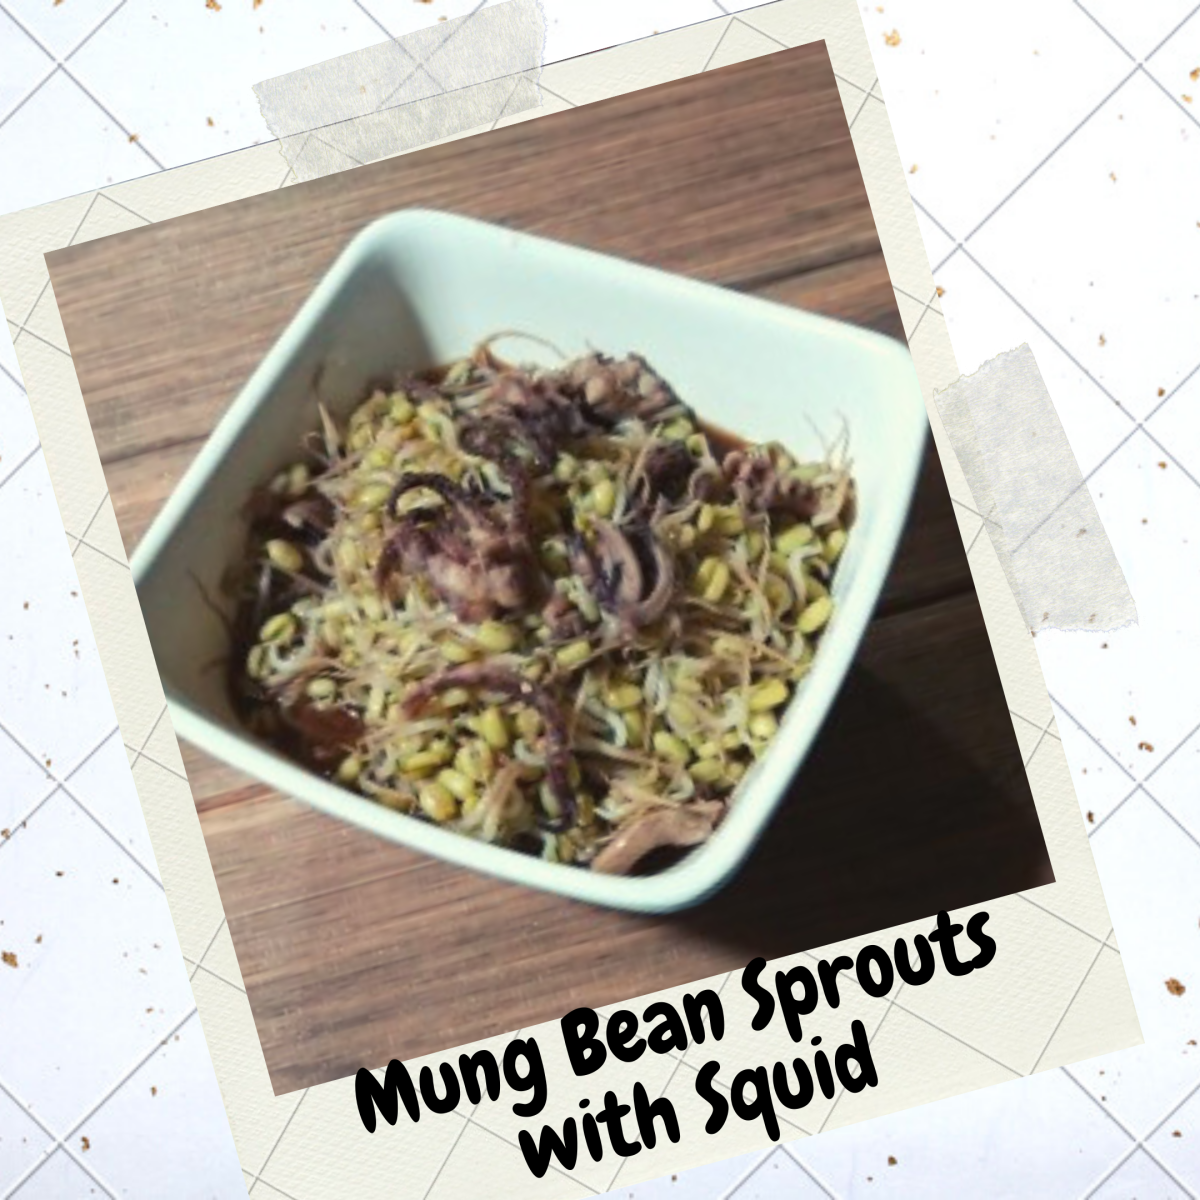 Learn how to prepare mung bean sprouts with squid